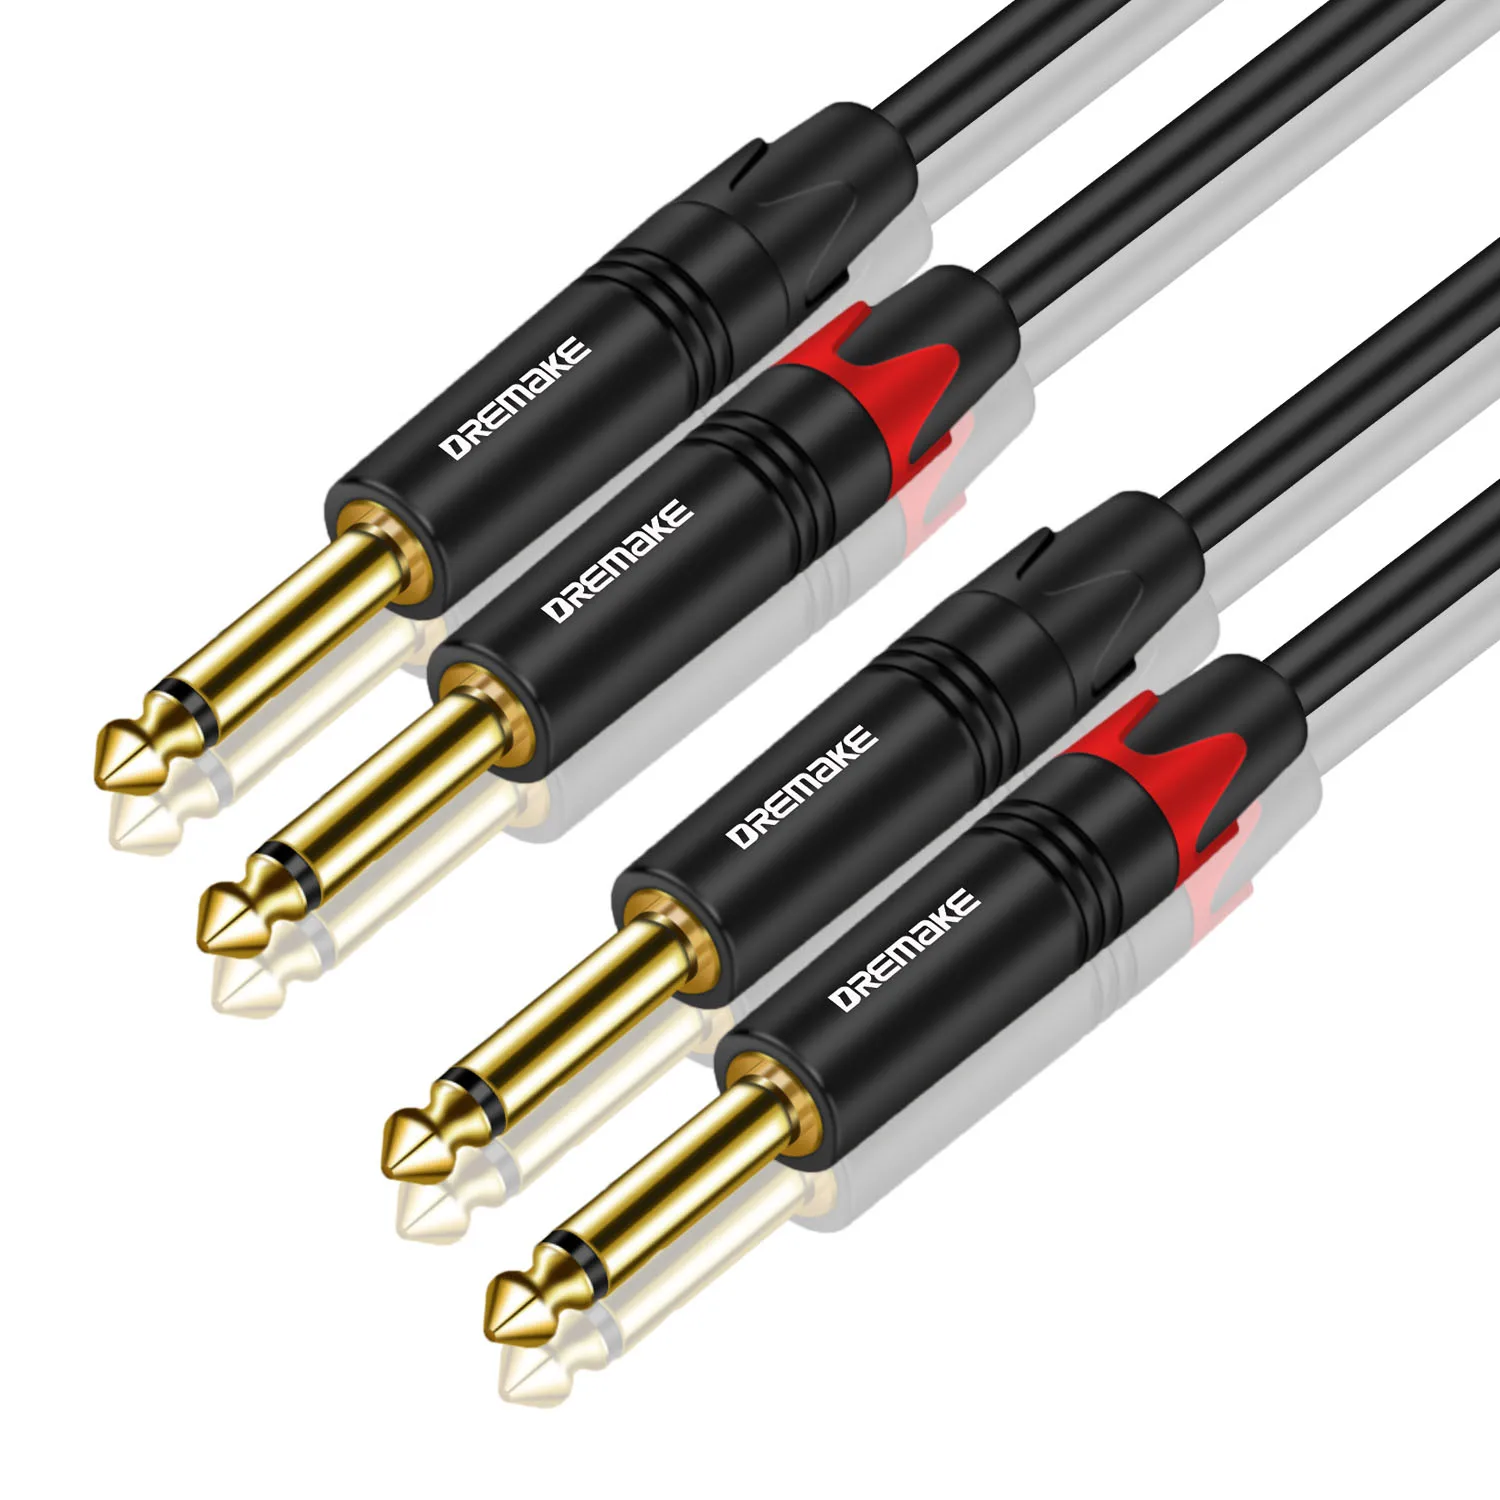 DREMAKE TS 6.35mm to 6.35mm Mono Amp Cord, 2 x 1/4'' TS Mono 6.35mm Jack Male to 2 x 1/4'' Male Audio Cable for Guitar Amp Mixer